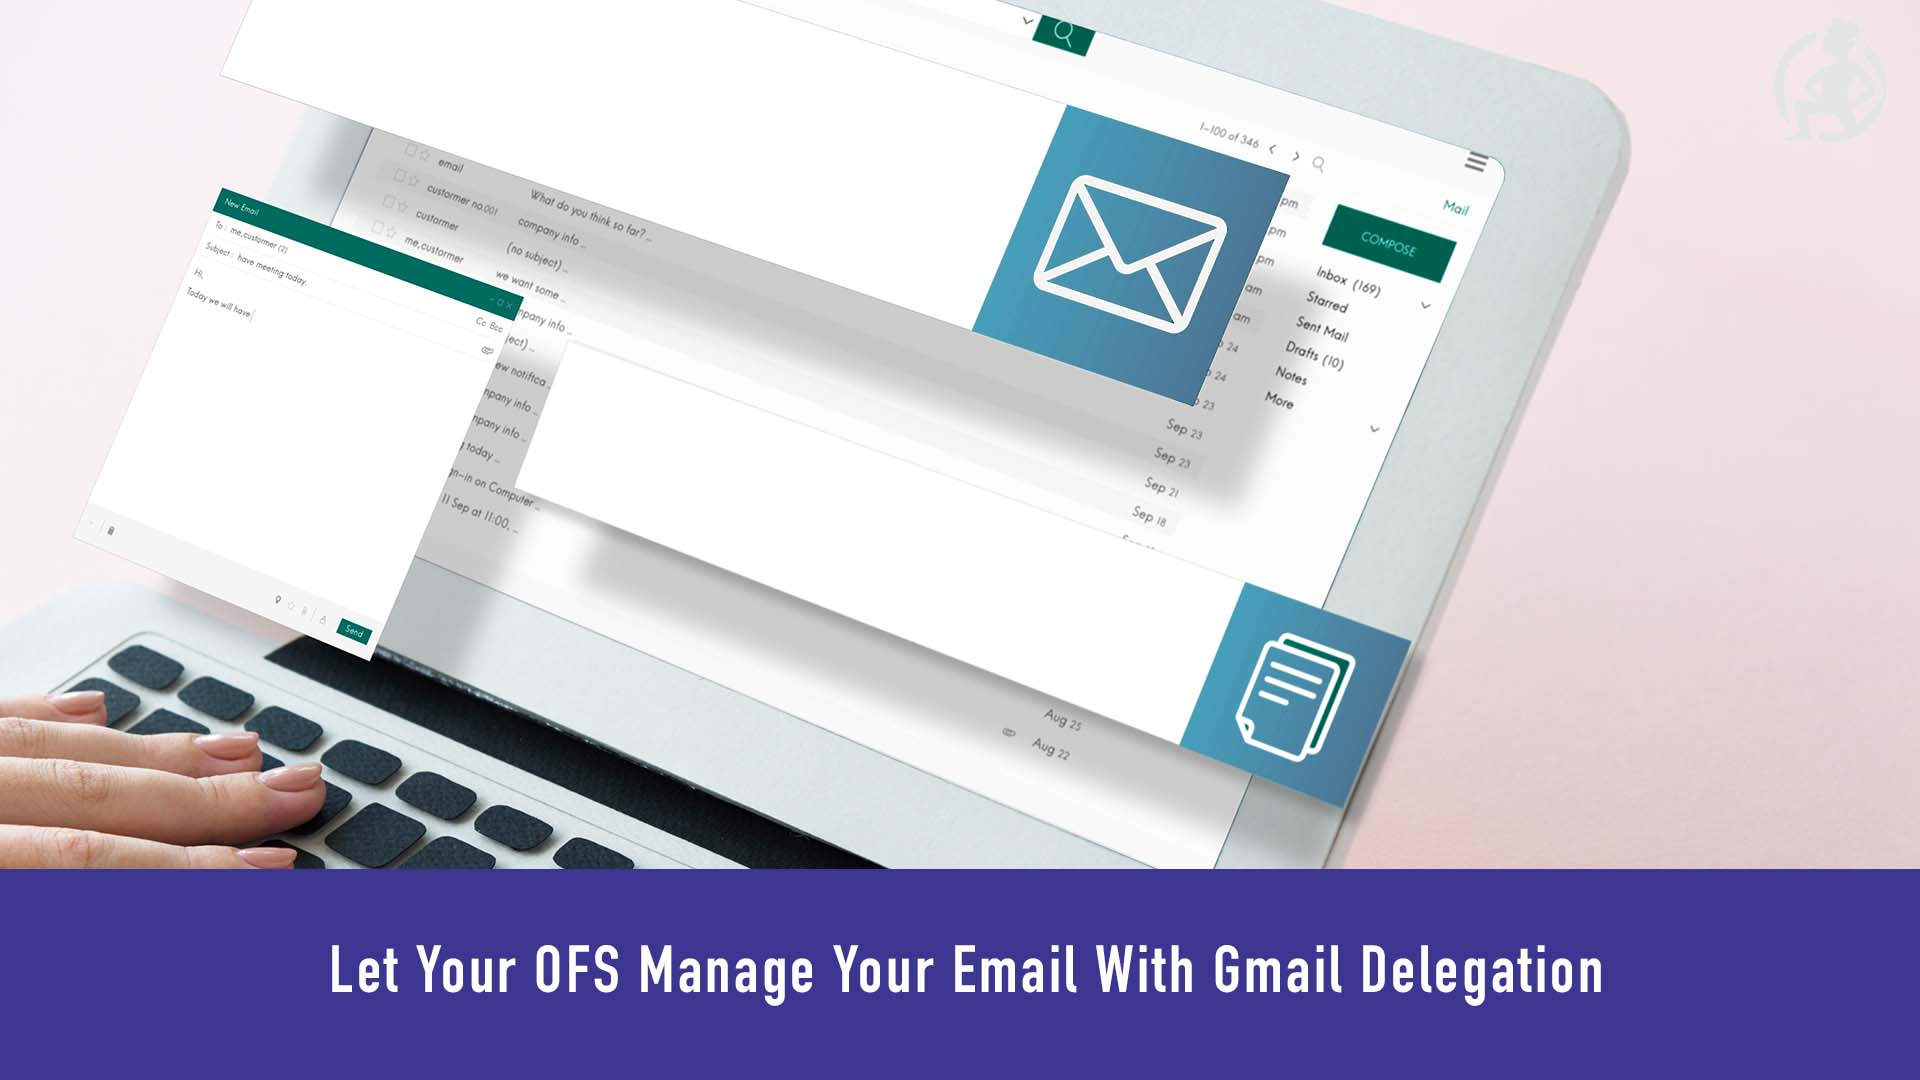 Let Your OFS Manage Your Email With Gmail Delegation